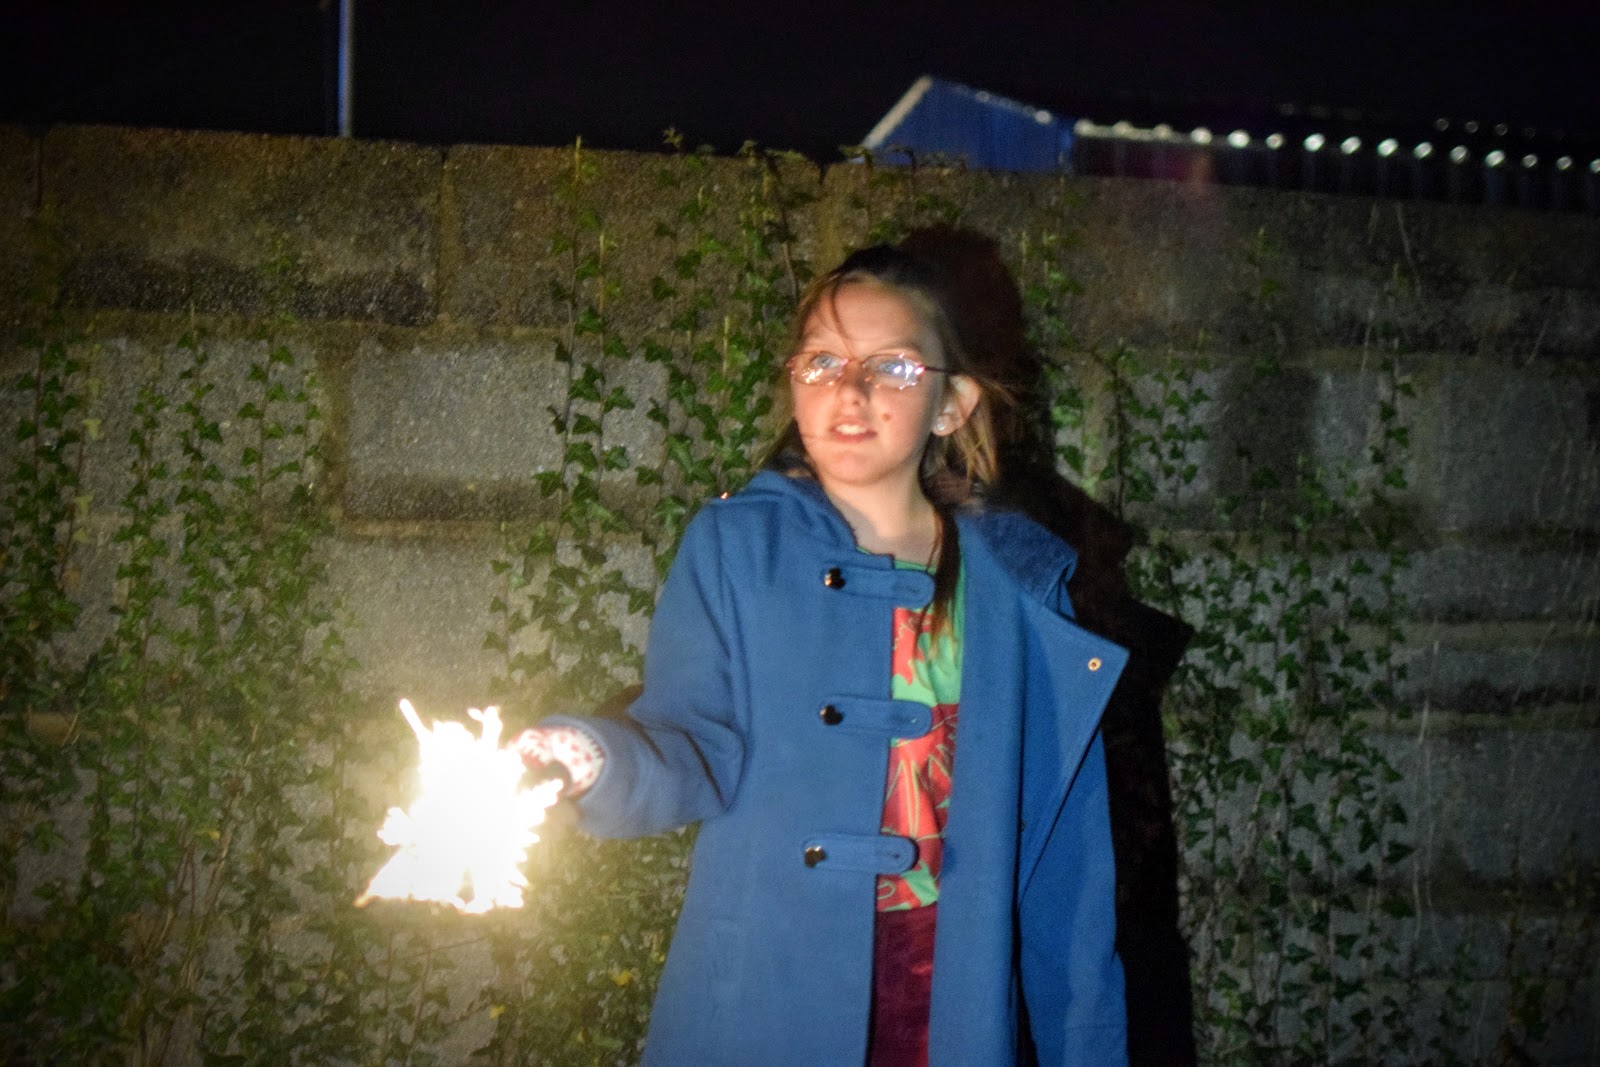 , Bonfire (Guy Fawkes) Night 5th November 2016- Fireworks, Sparklers and Hot Chocolate